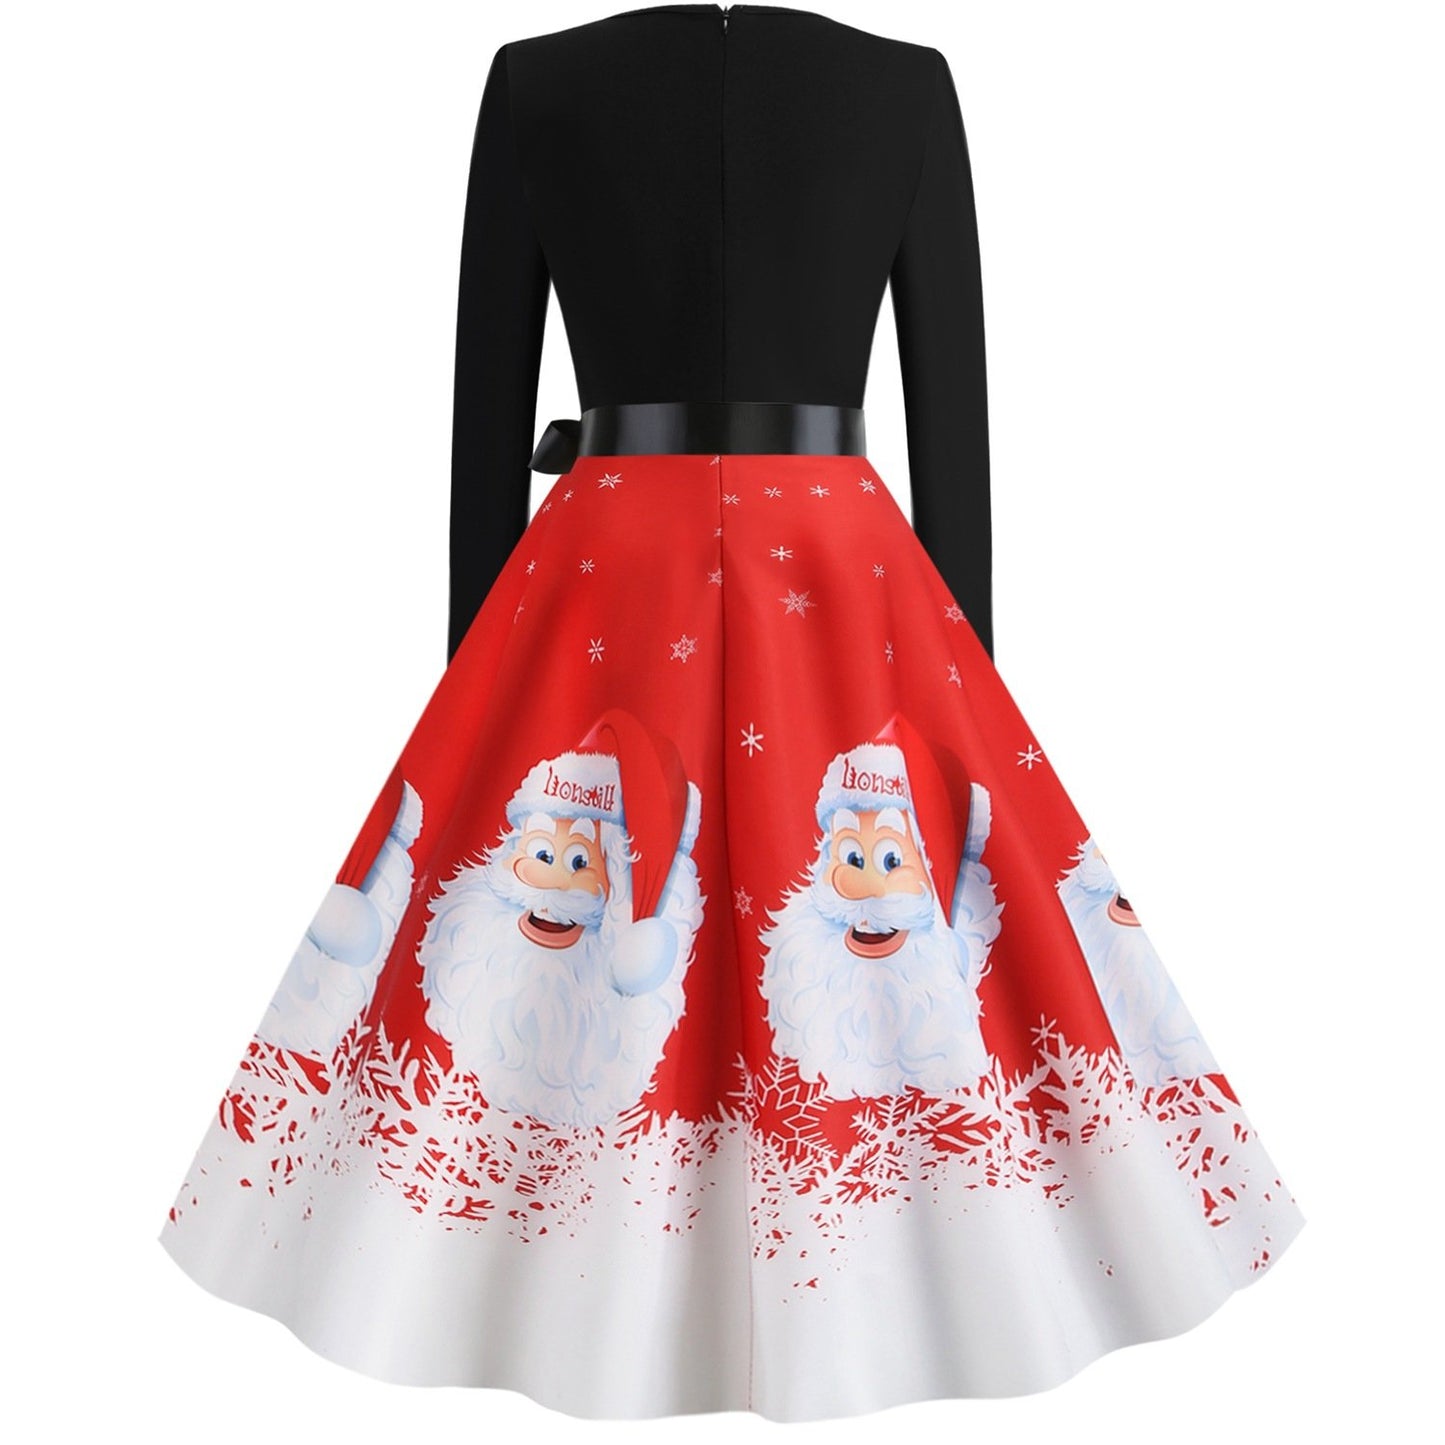 Vintage Merry Christmas Round Neck Long Sleeves Dresses-STYLEGOING